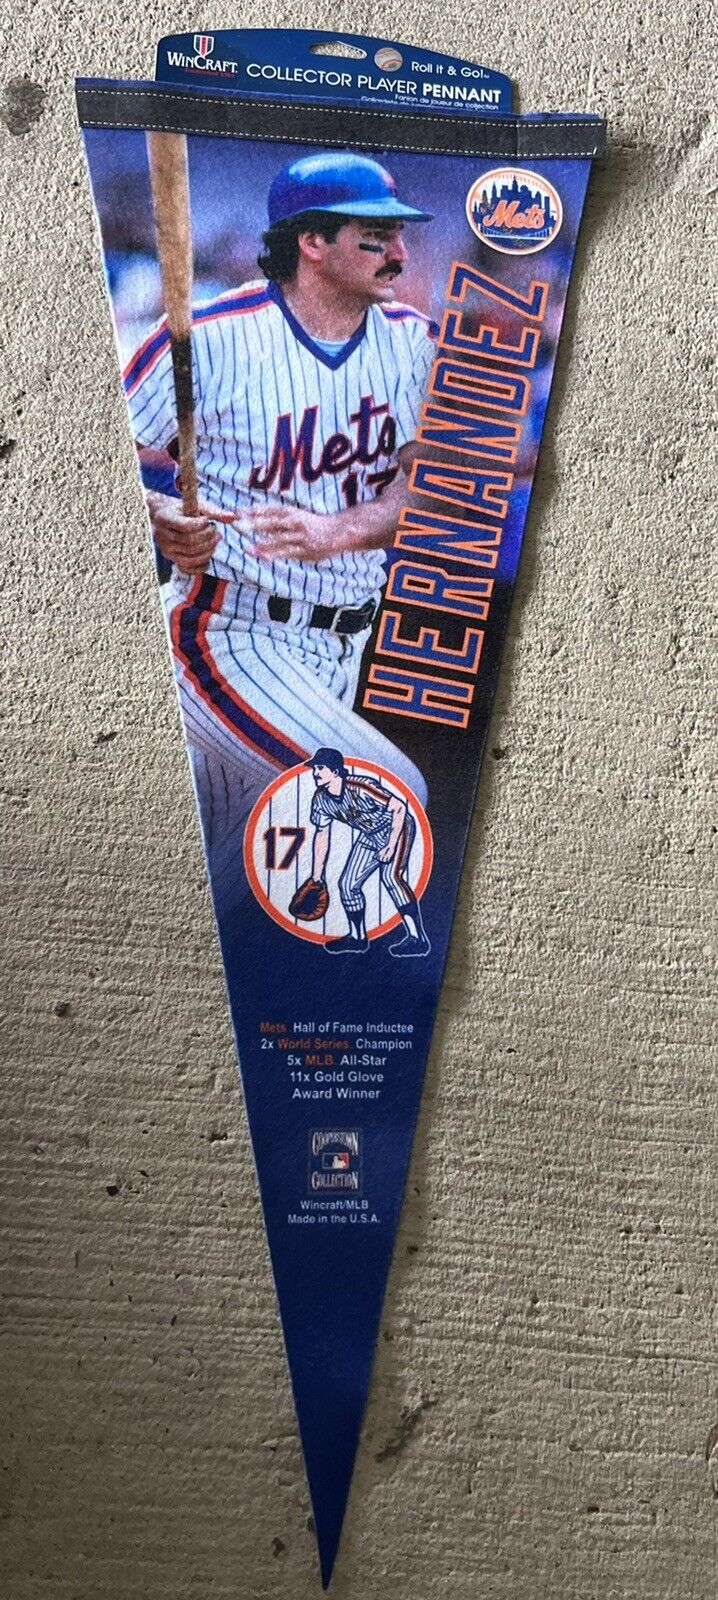 NY METS KEITH HERNANDEZ PENNANT RETIRED NUMBER #17 BANNER 2022 WORLD SERIES 1986